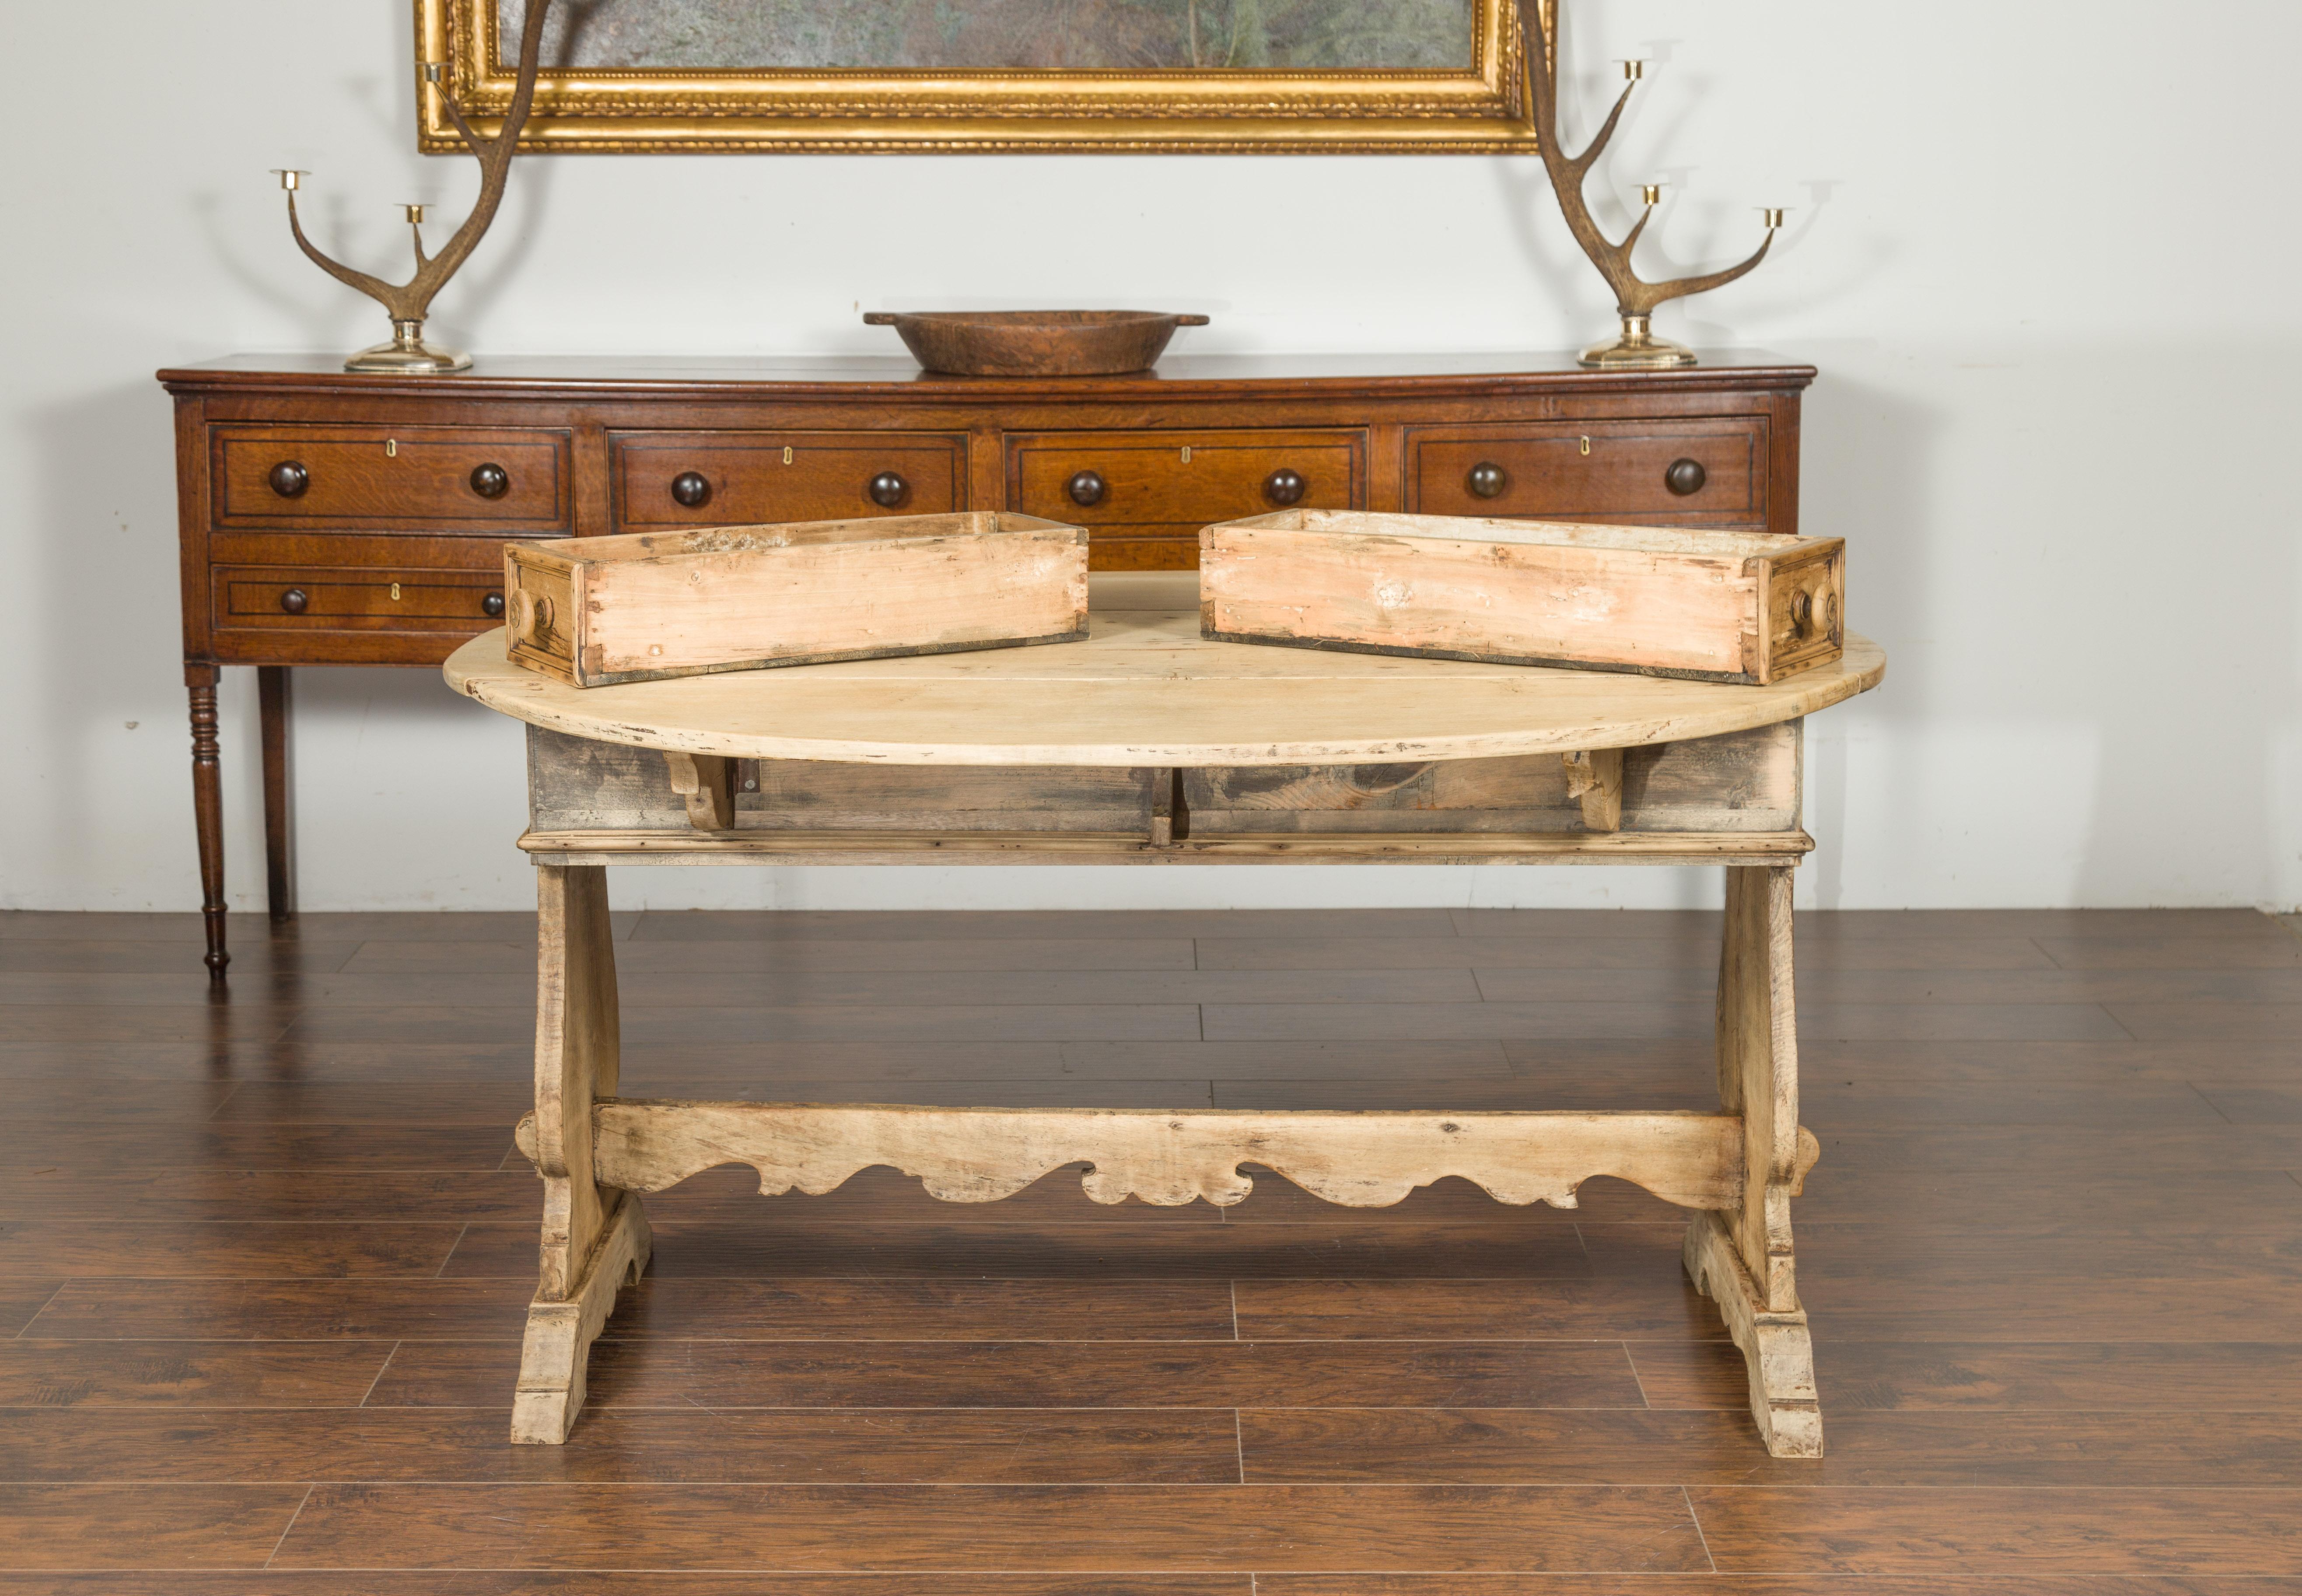 Oval Italian 1800s Bleached Walnut Drop-Leaf Trestle Table with Drawers For Sale 9